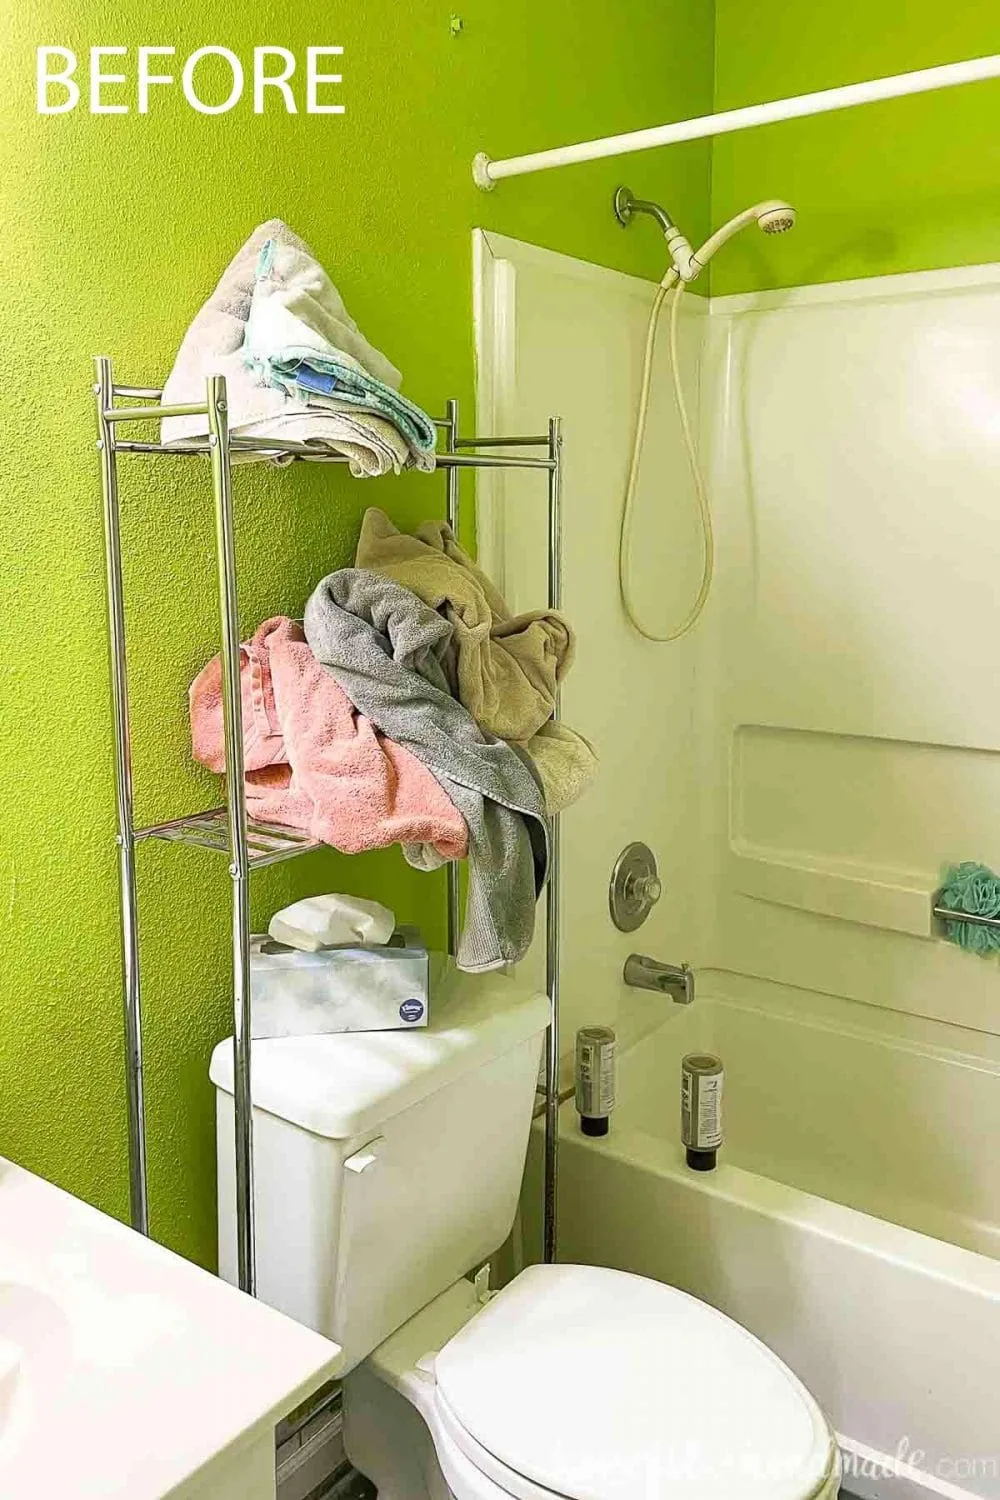 Picture of the green walls and metal shelving with poorly folded towels over the toilet. 